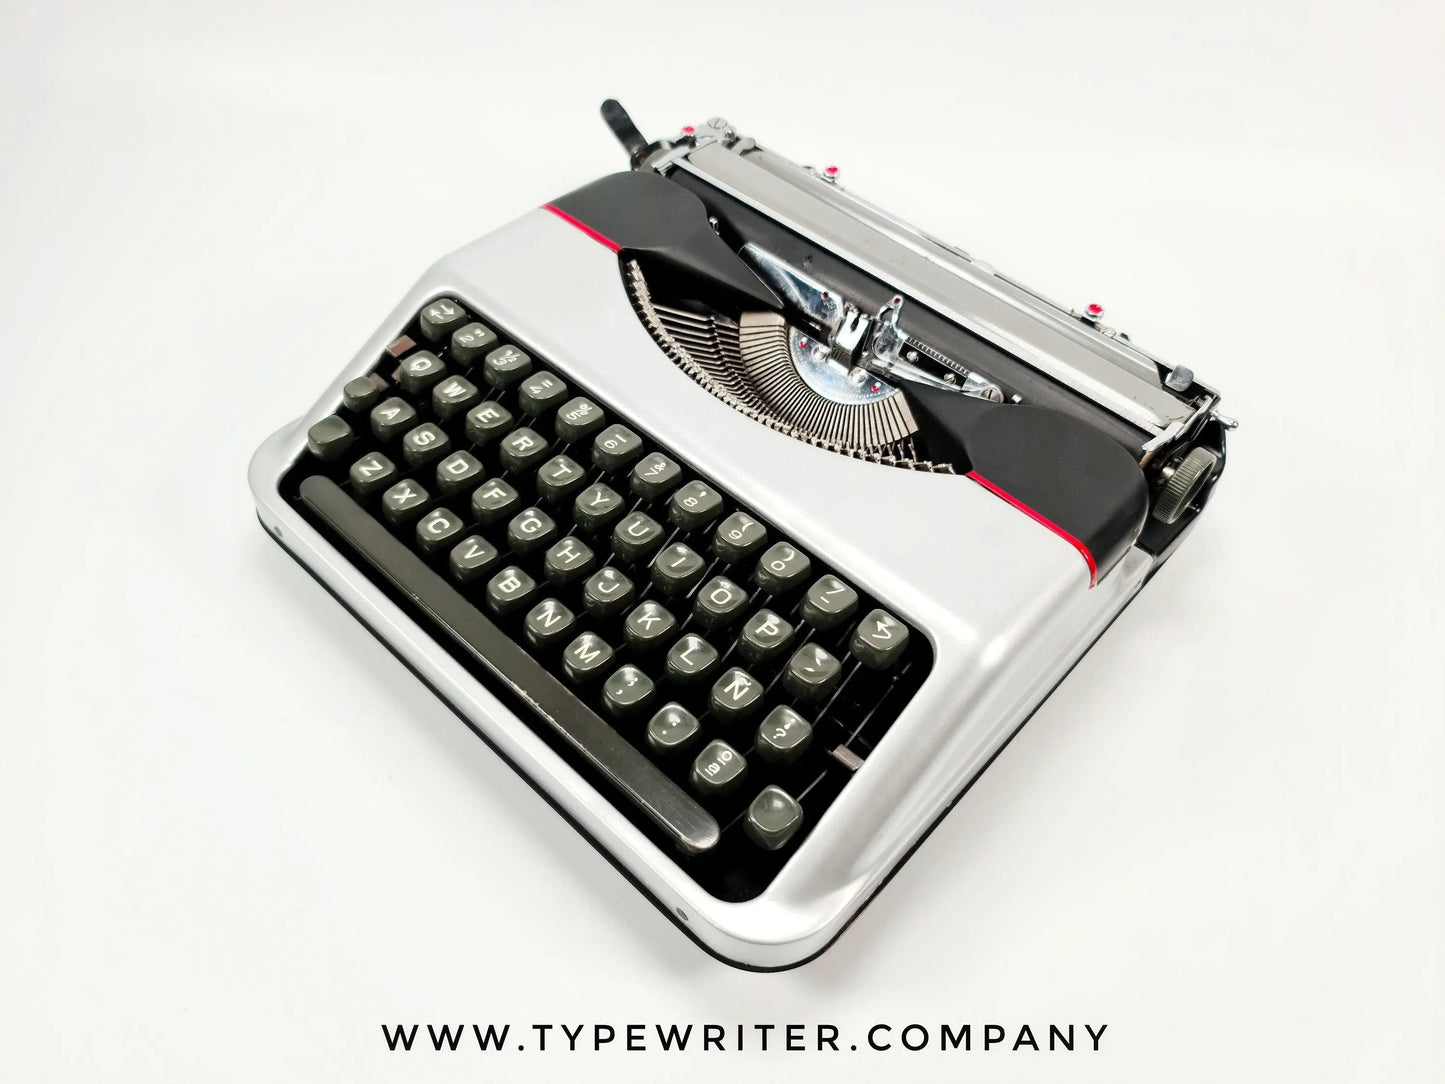 Hermes Baby Silver Typewriter, Vintage, Mint Condition, Manual Portable, Professionally Serviced by Typewriter.Company - ElGranero Typewriter.Company